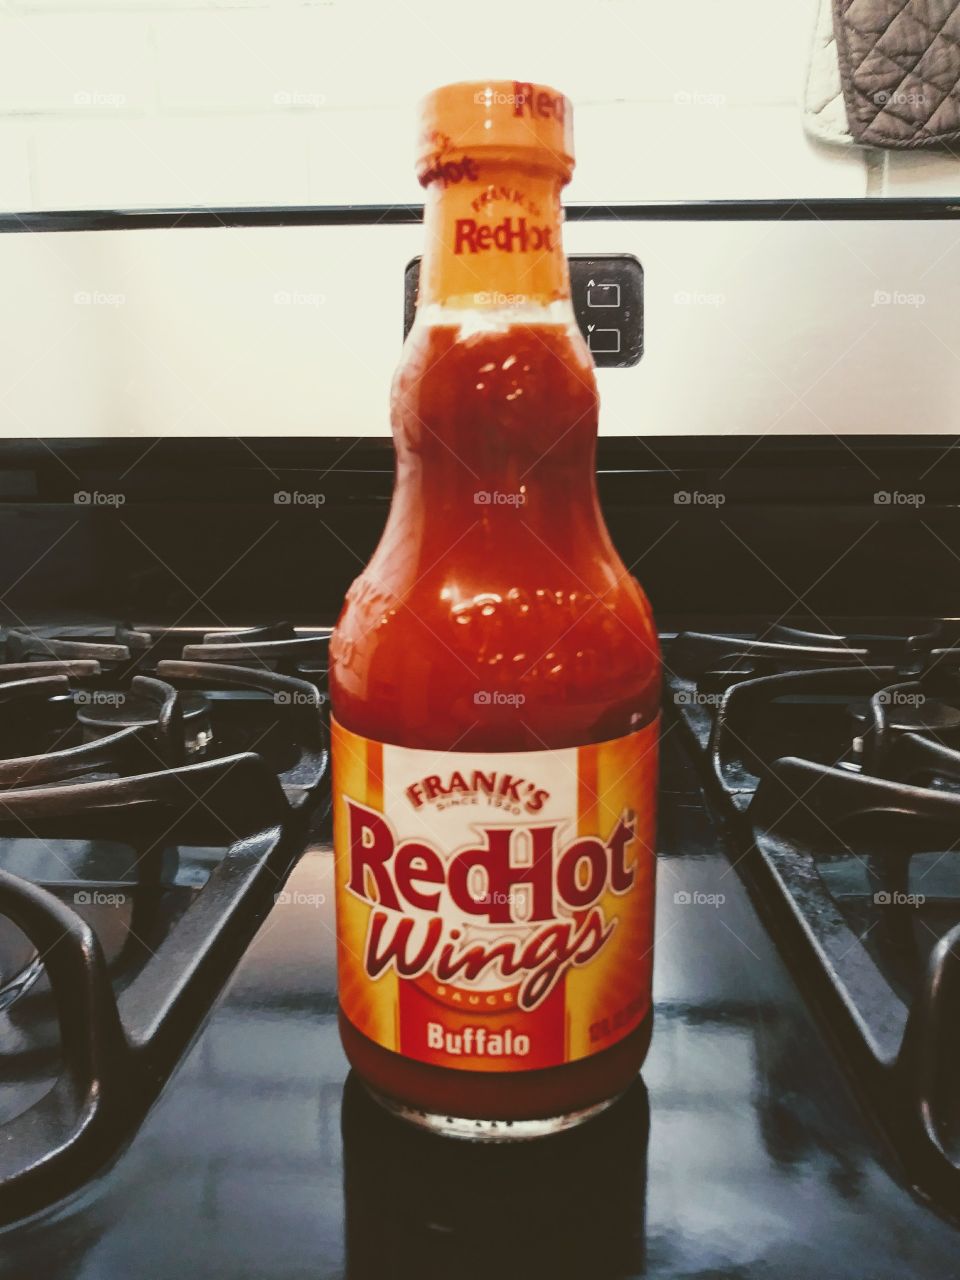 Frank's RedHot Enthusiast by Frank's RedHot